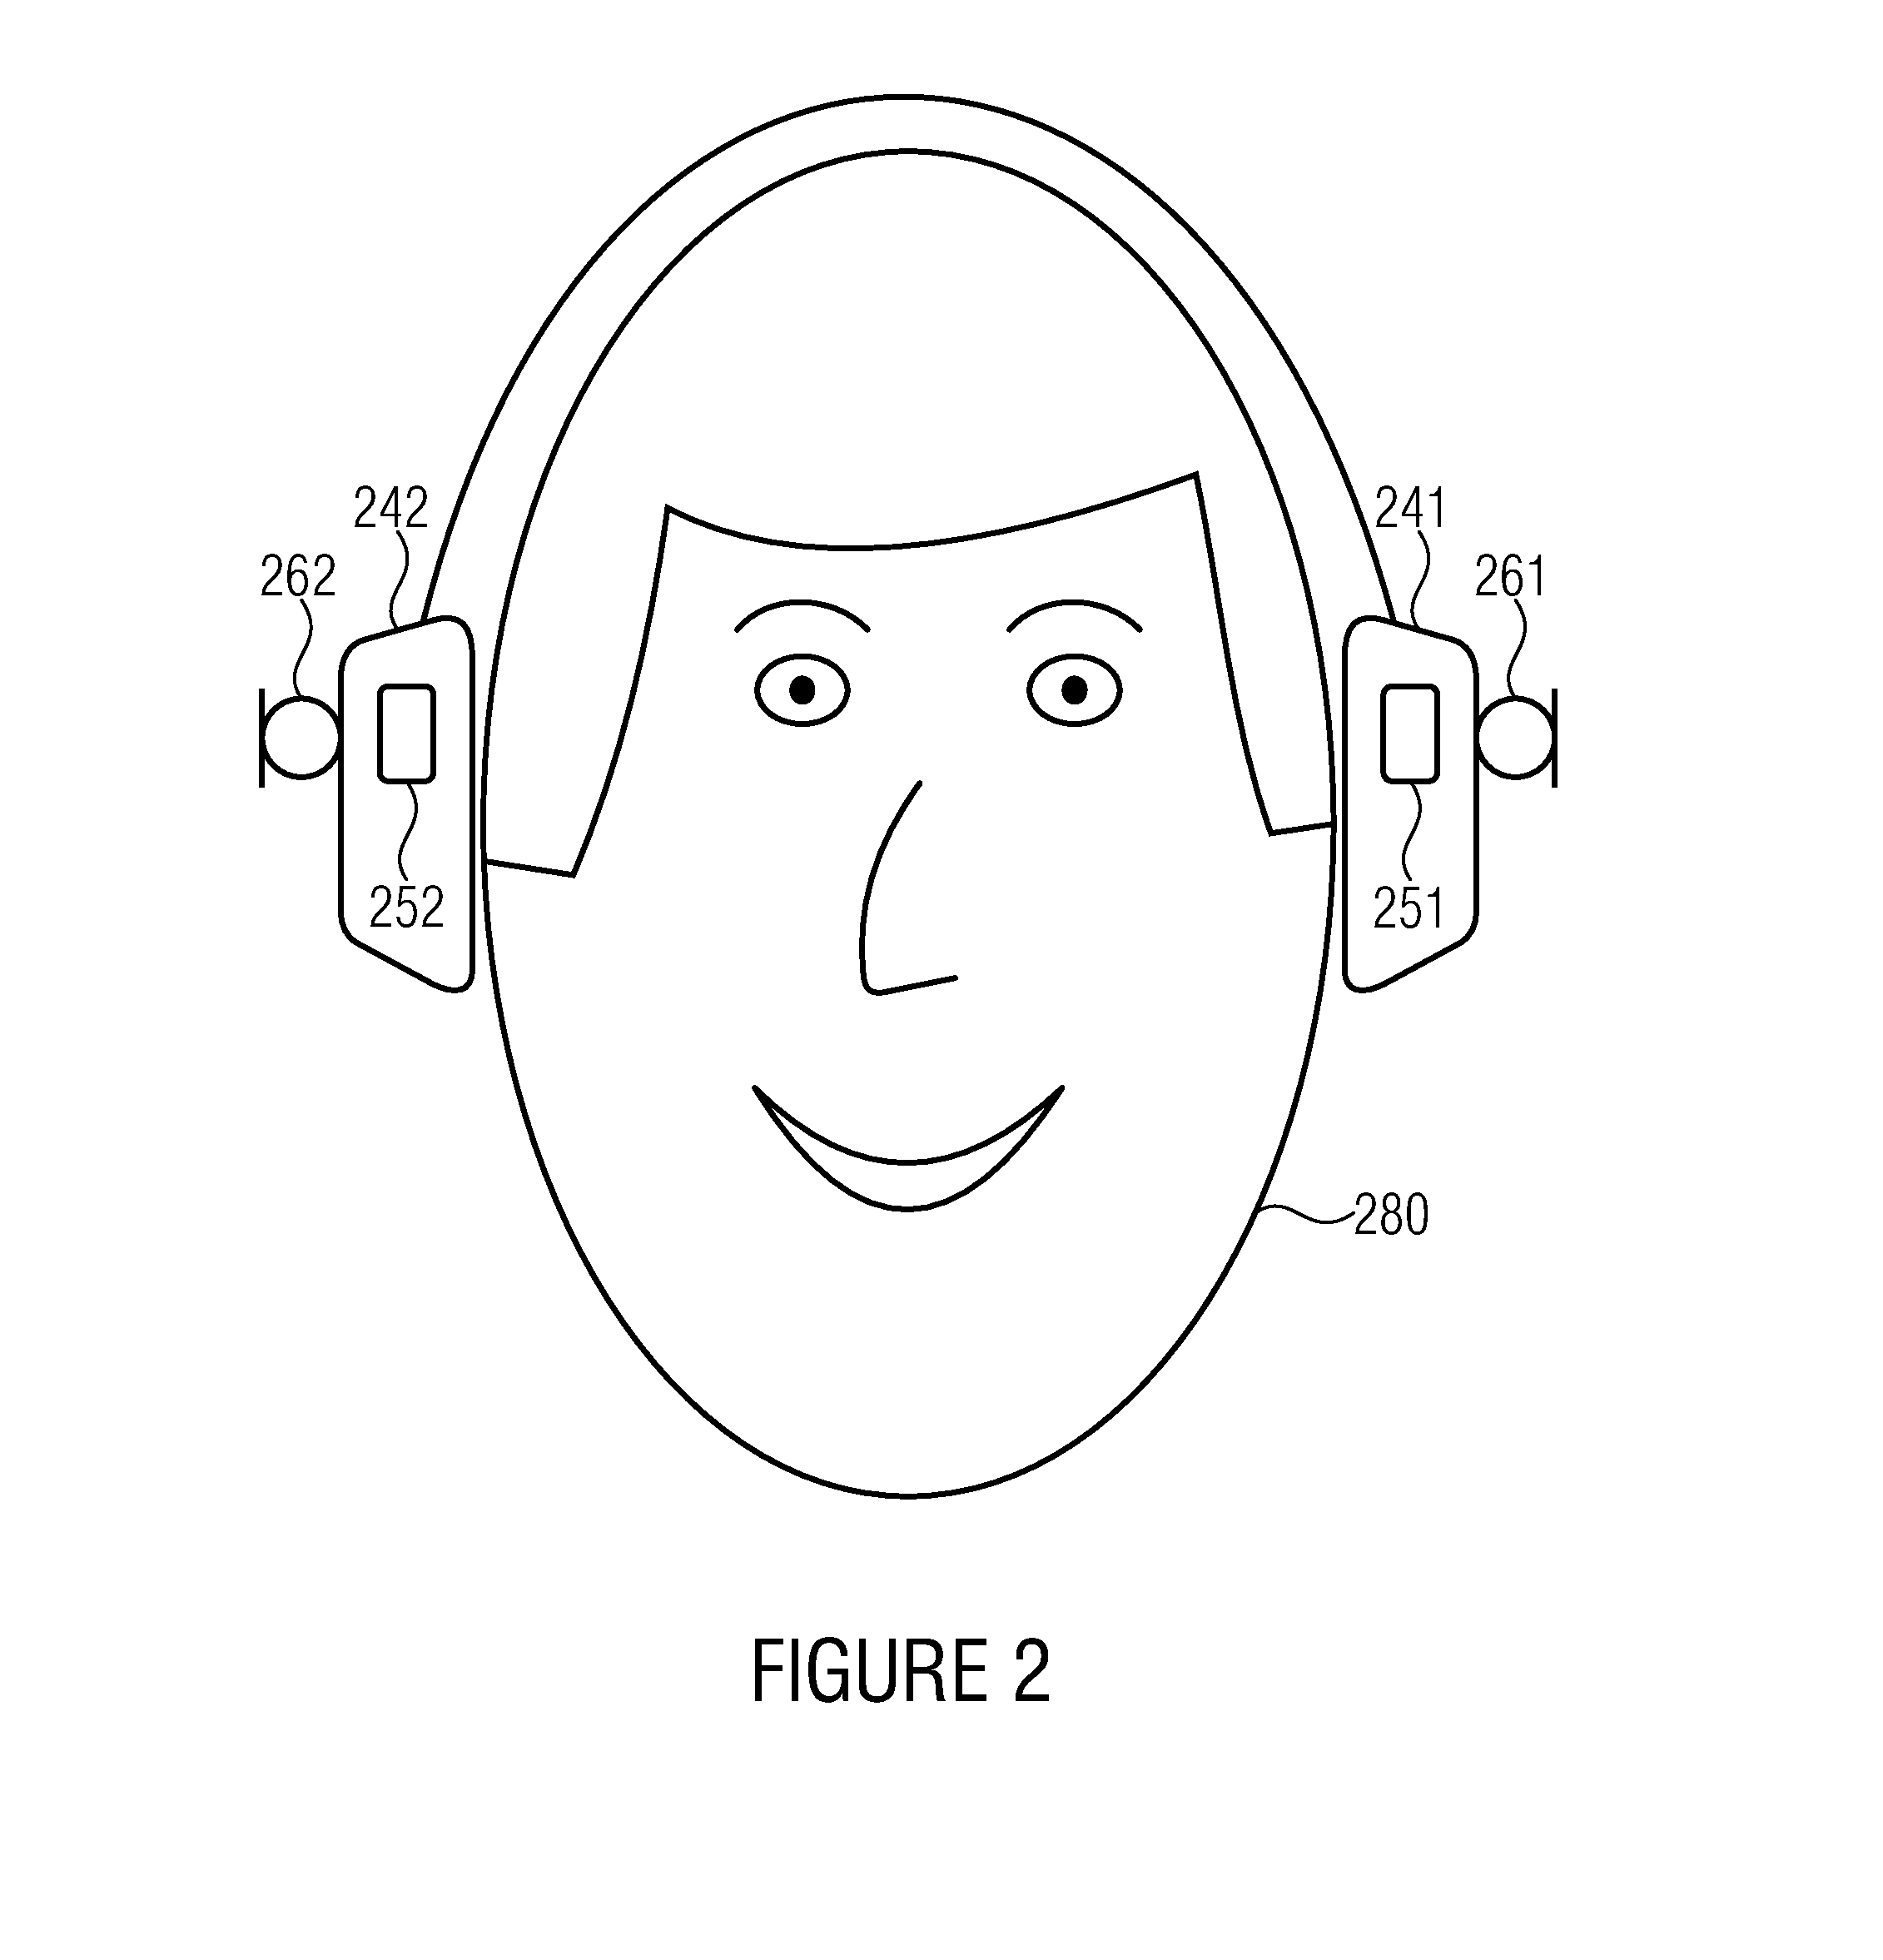 Apparatus and method for improving the perceived quality of sound reproduction by combining active noise cancellation and a perceptual noise compensation